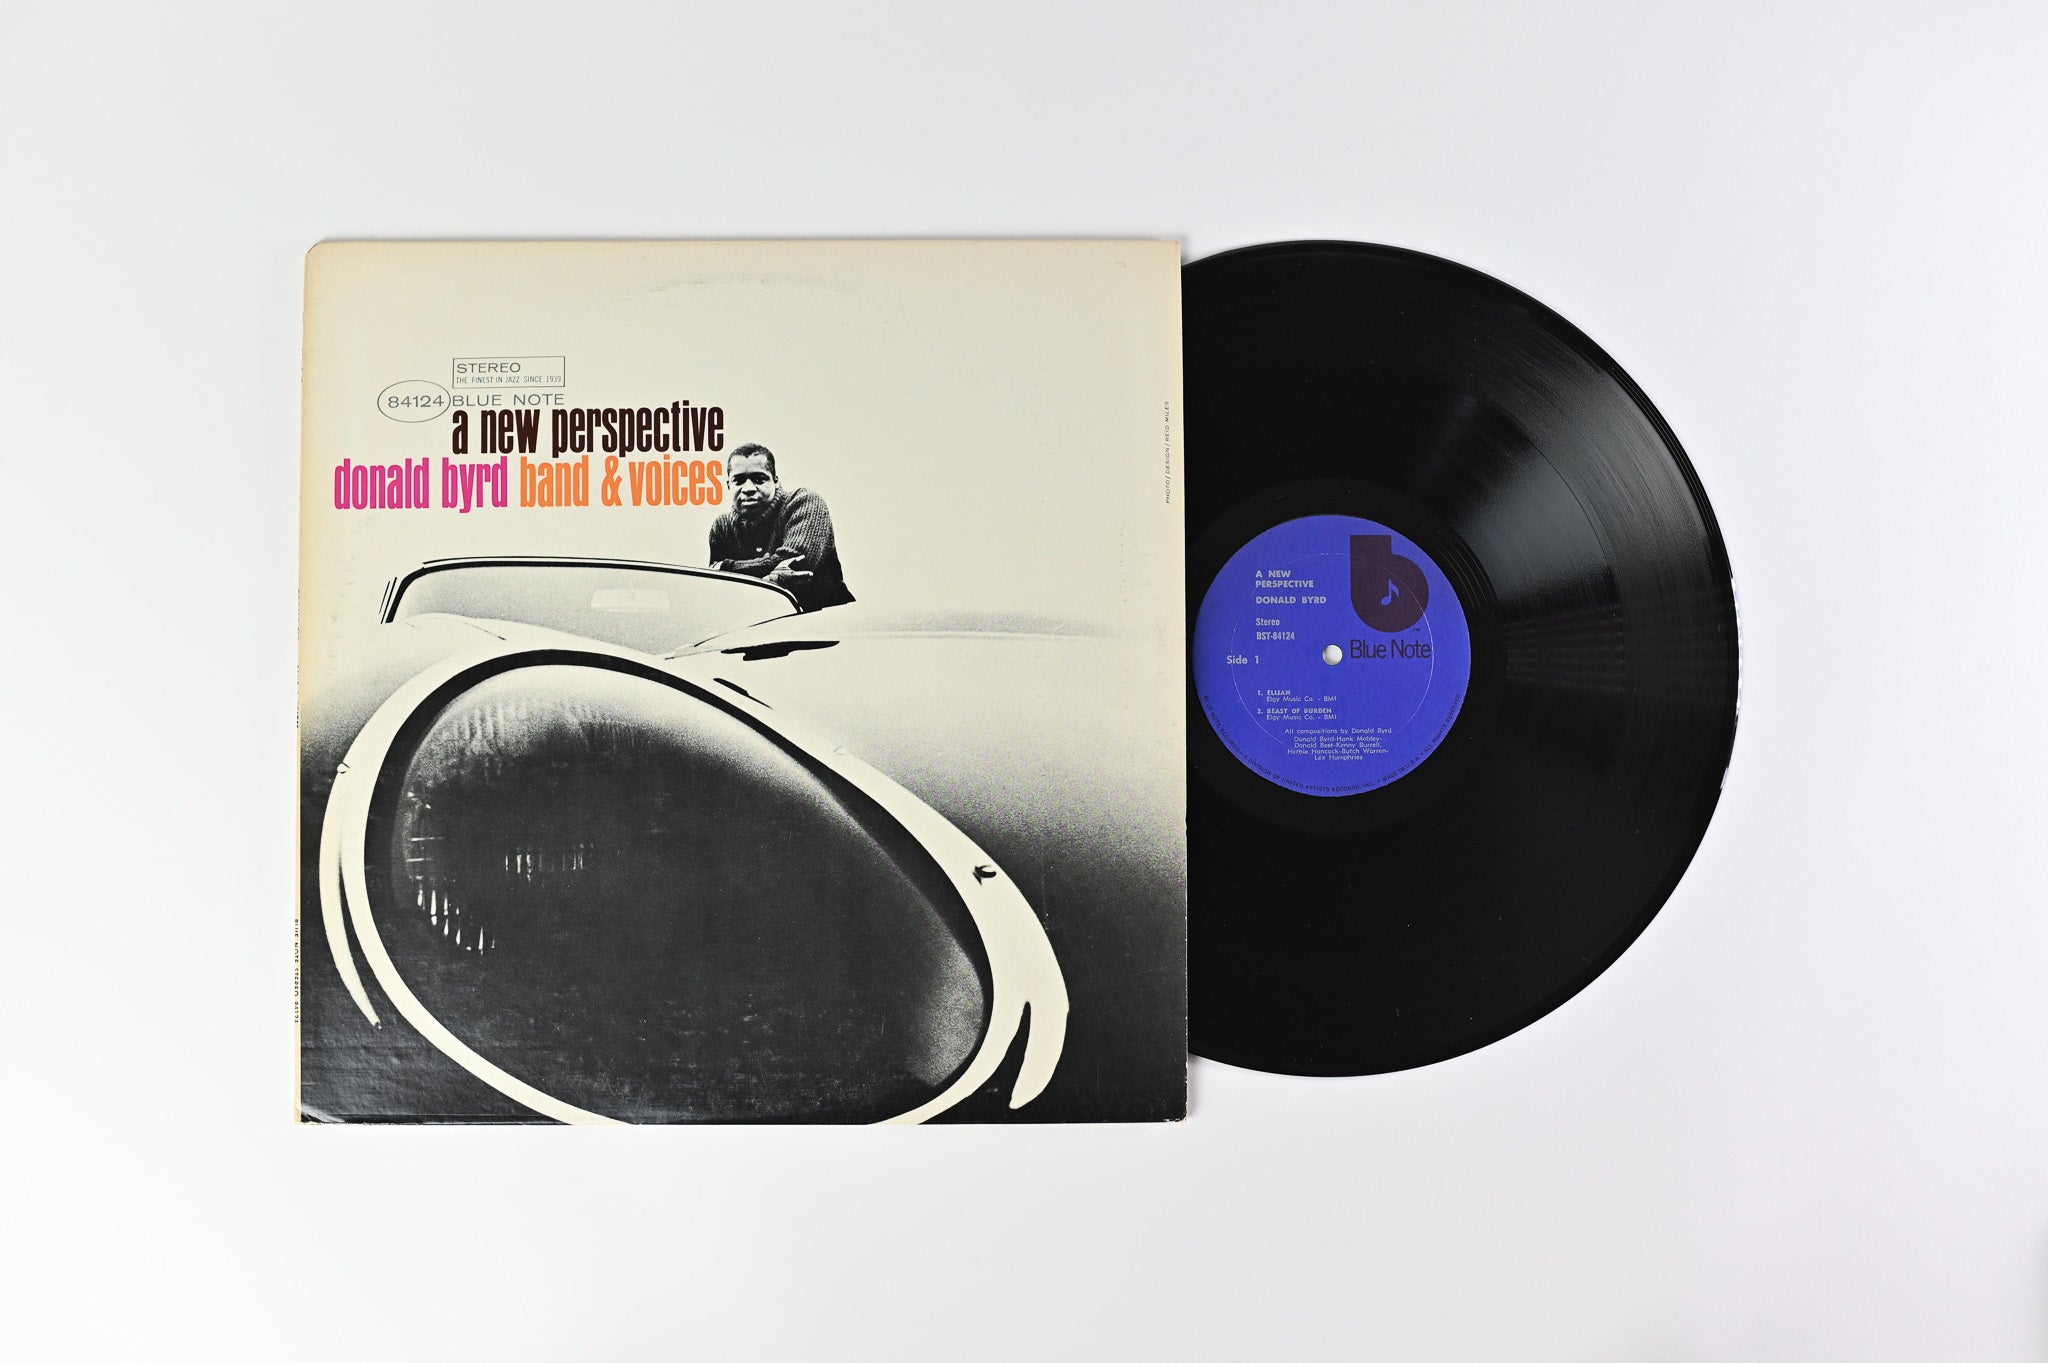 Donald Byrd - A New Perspective on Blue Note Reissue